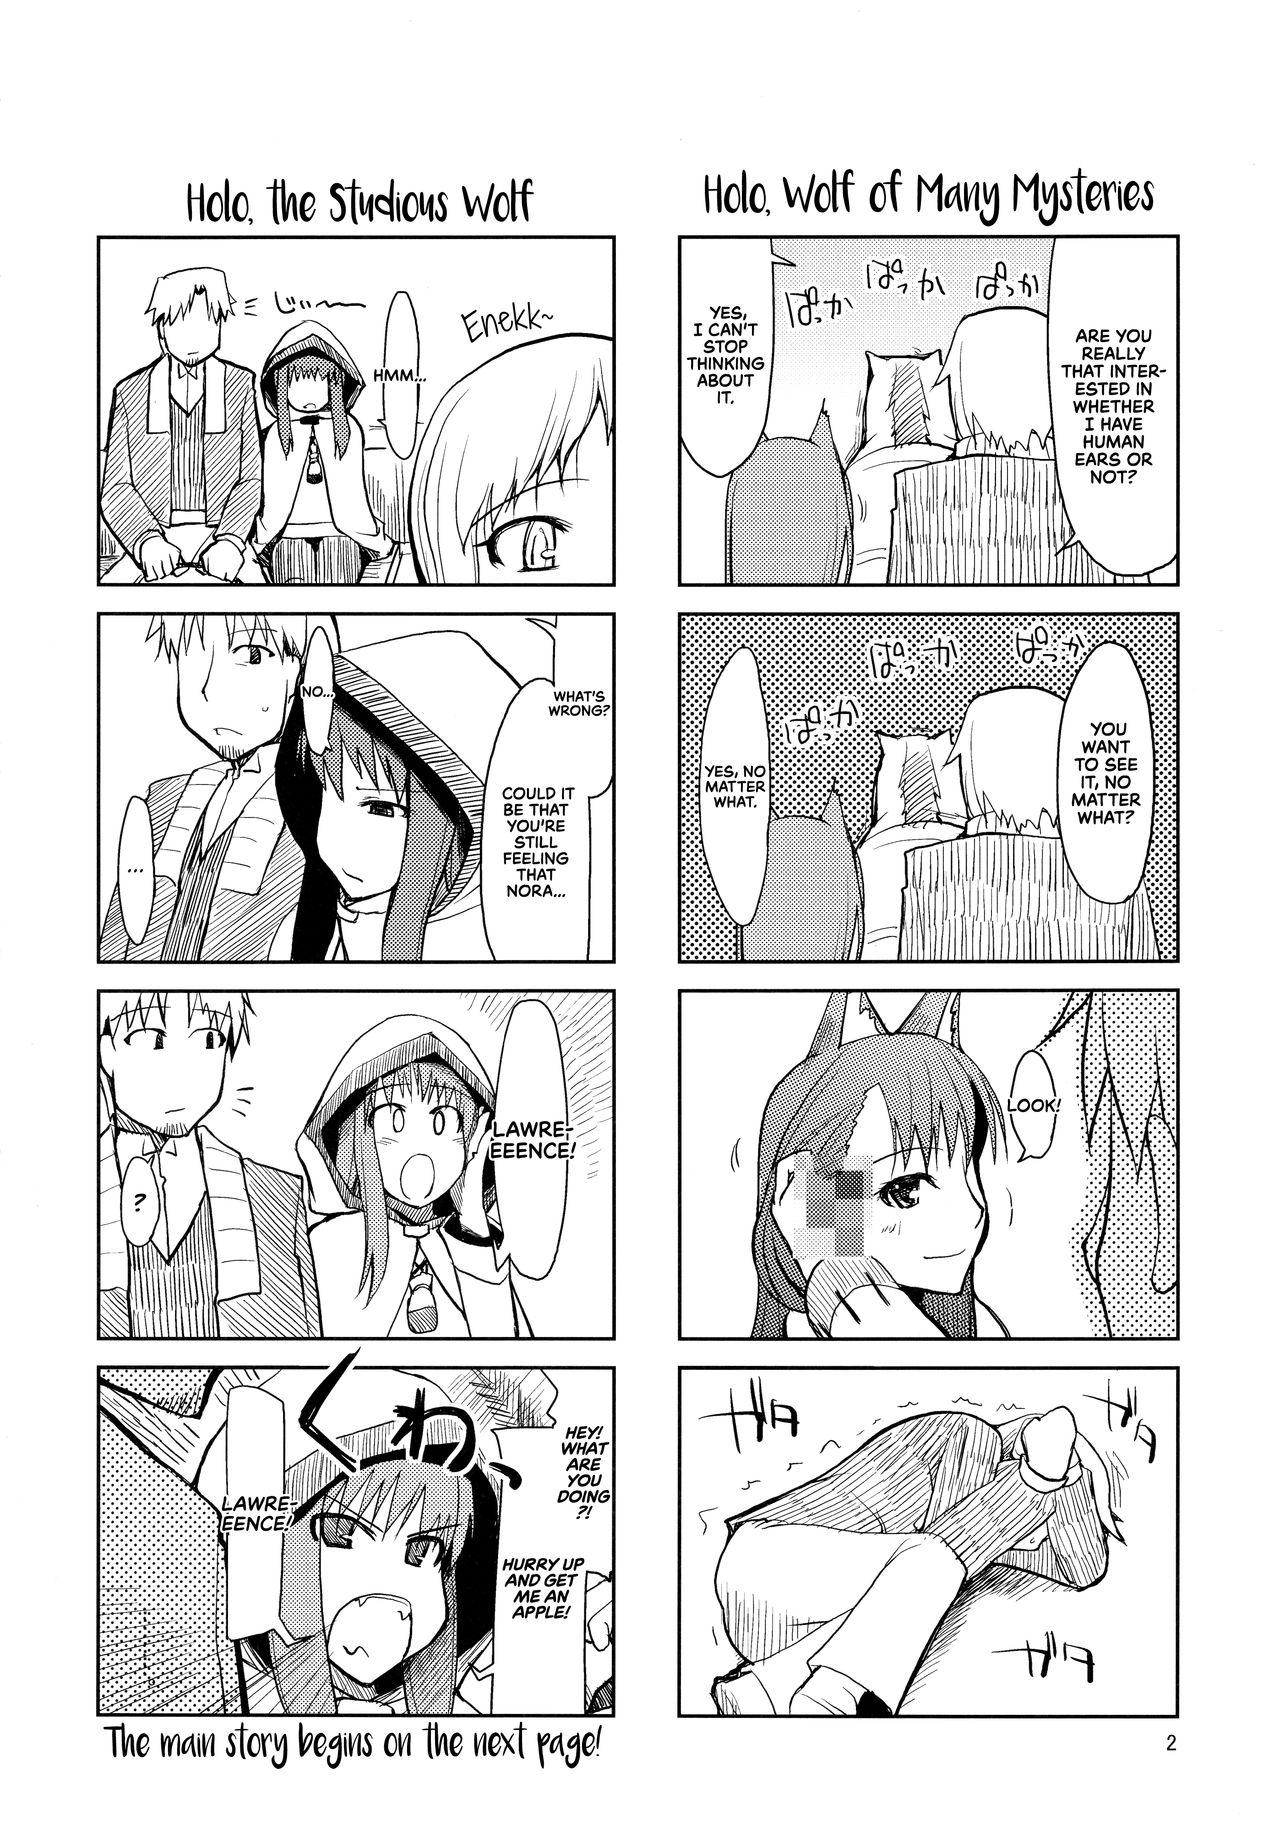 Ex Girlfriends wolf’s regret - Spice and wolf | ookami to koushinryou Gay Doctor - Page 3